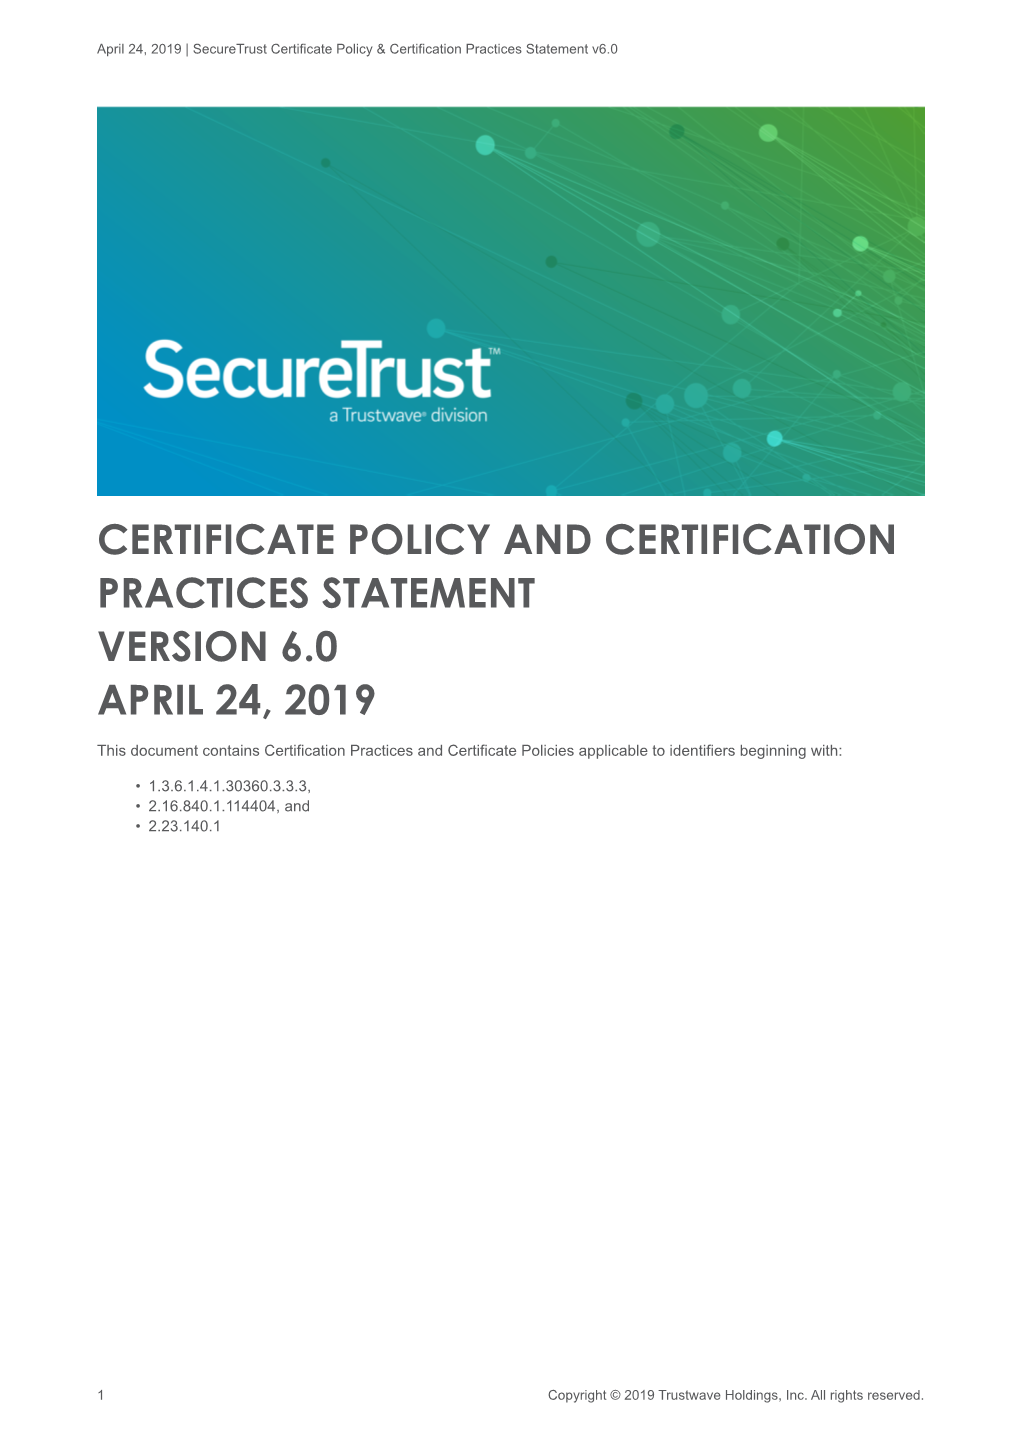 Certificate Policy and Certification Practices Statement Version 6.0 April 24, 2019